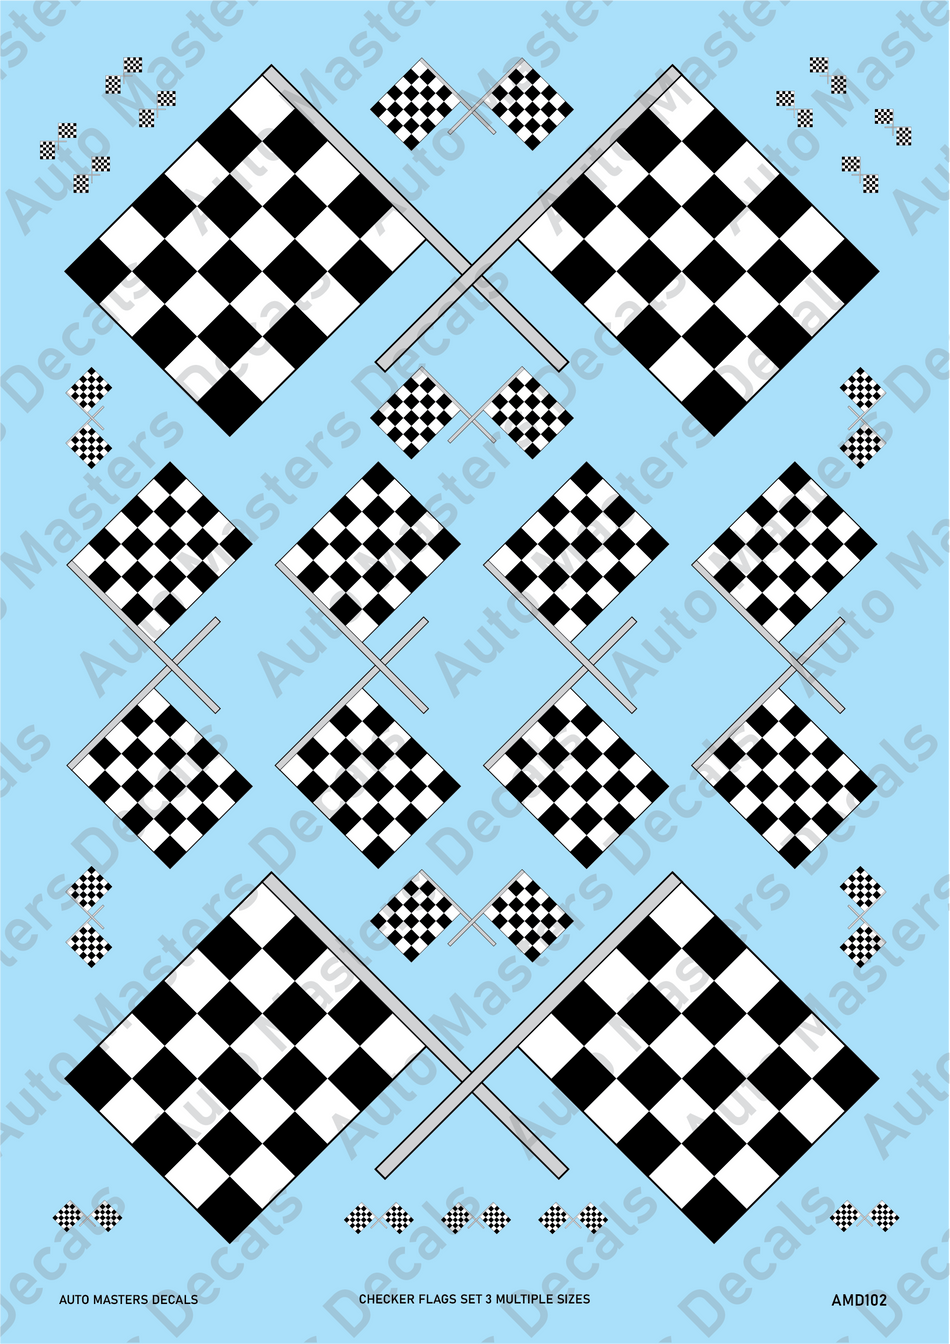 Auto Masters Decals Checkered Flags Decal Set Multiple Sizes Set 3